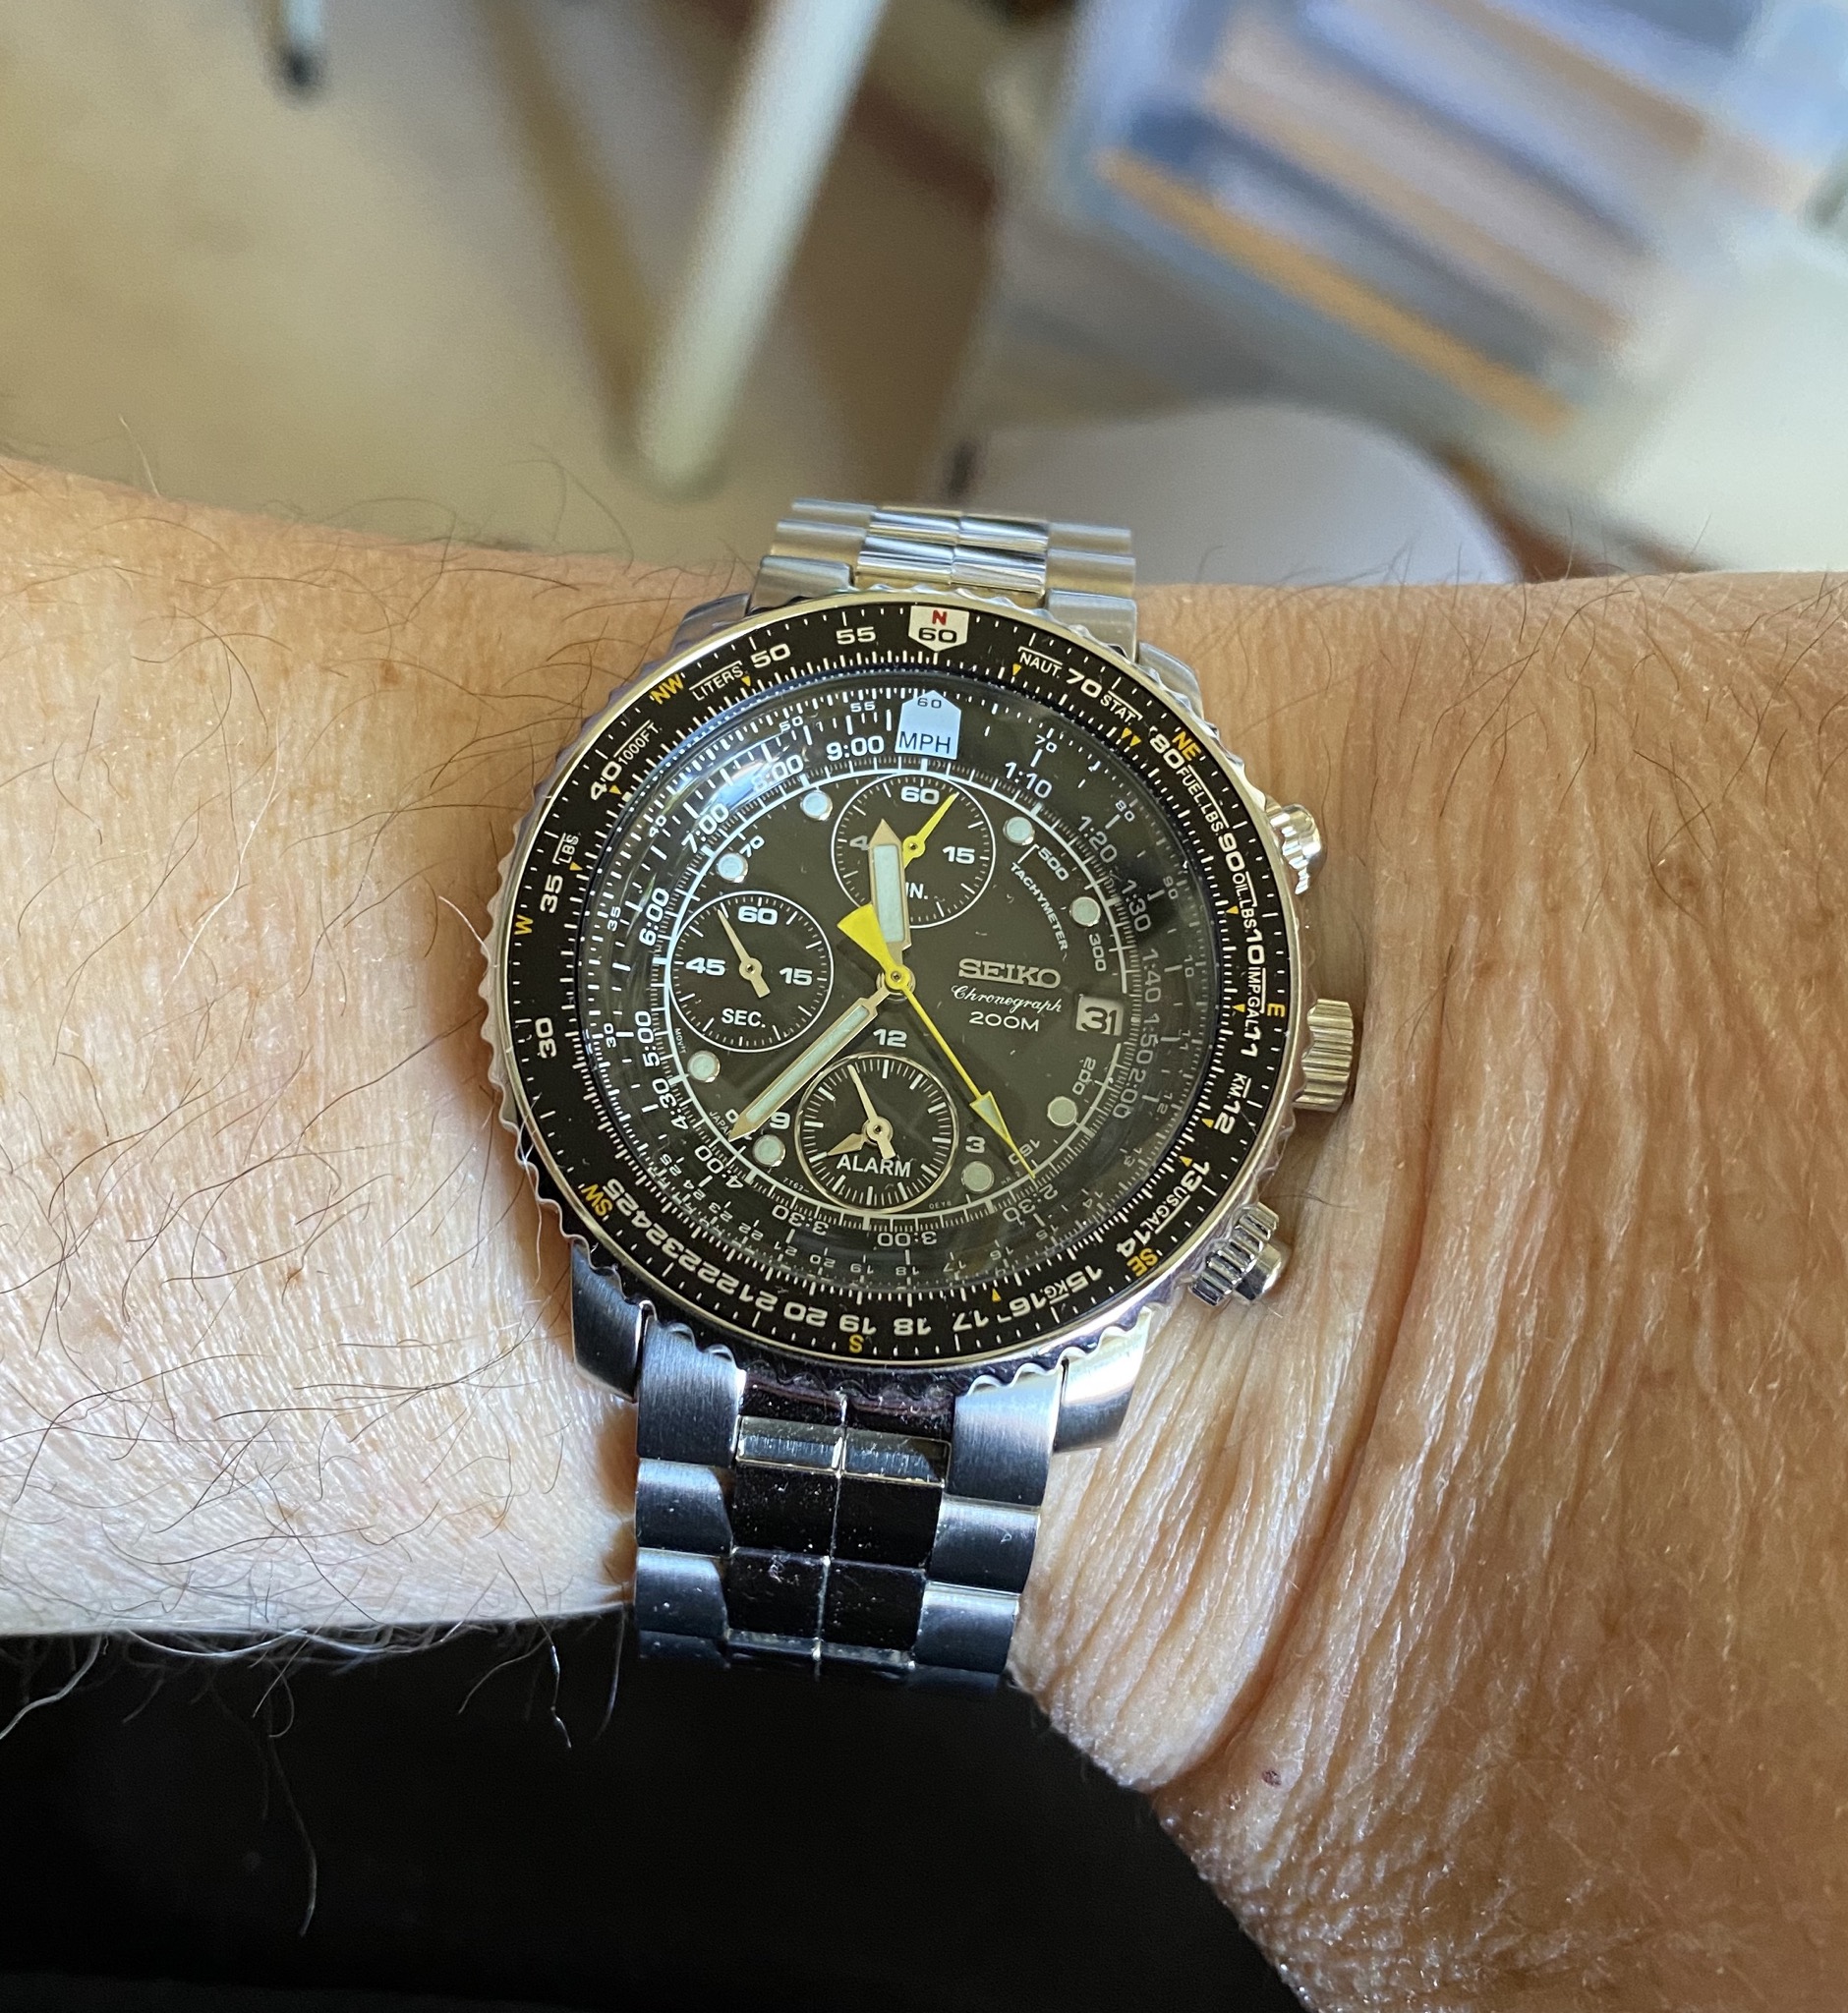 What's your opinion on the Seiko Flightmaster? | Omega Forums